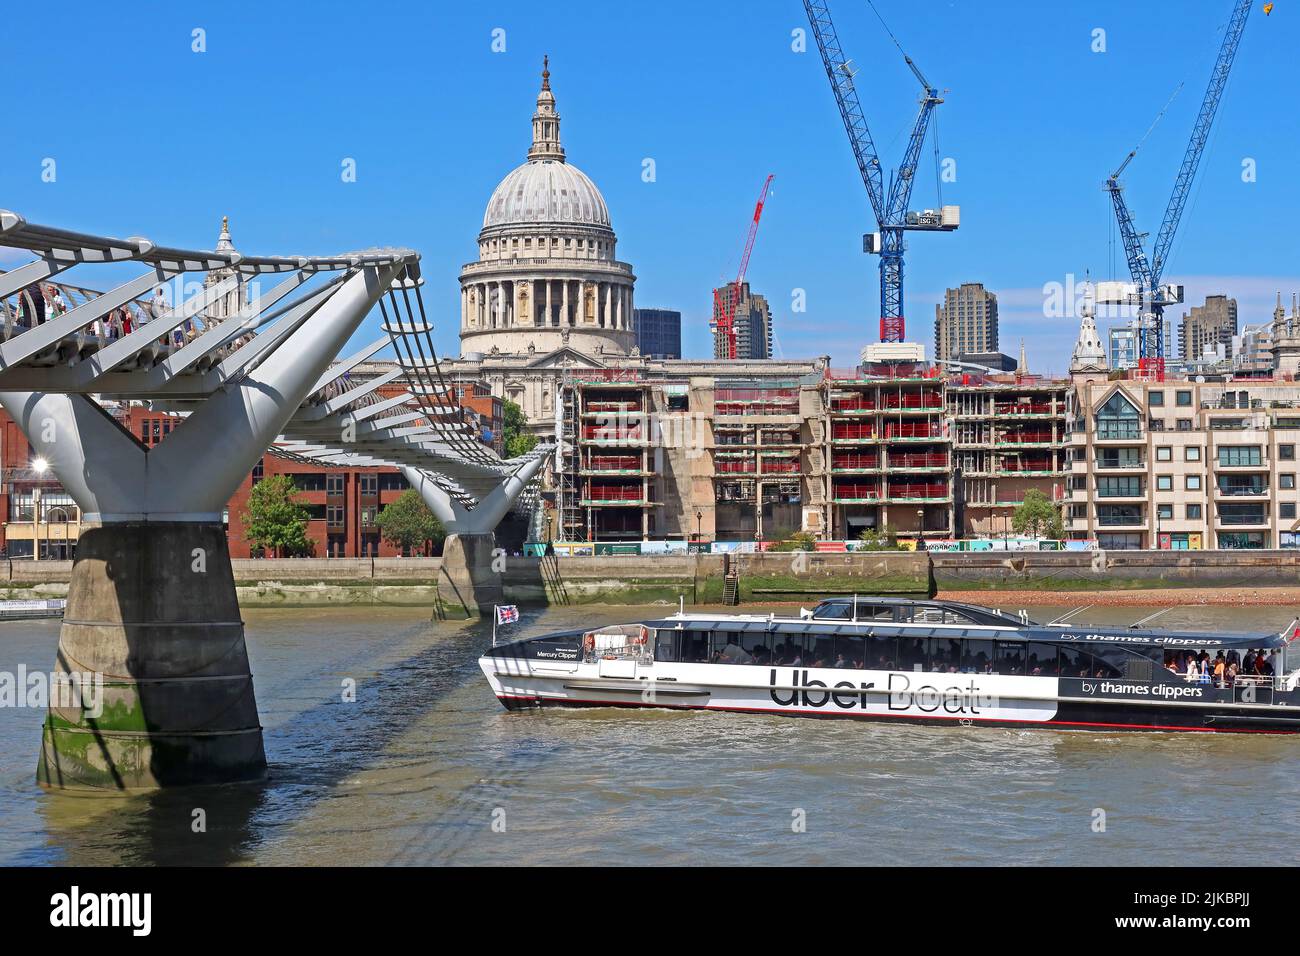 Uber Boat passing under the Millennium bridge, over the Thames, looking over at St Pauls Cathedral and construction cranes, London Stock Photo